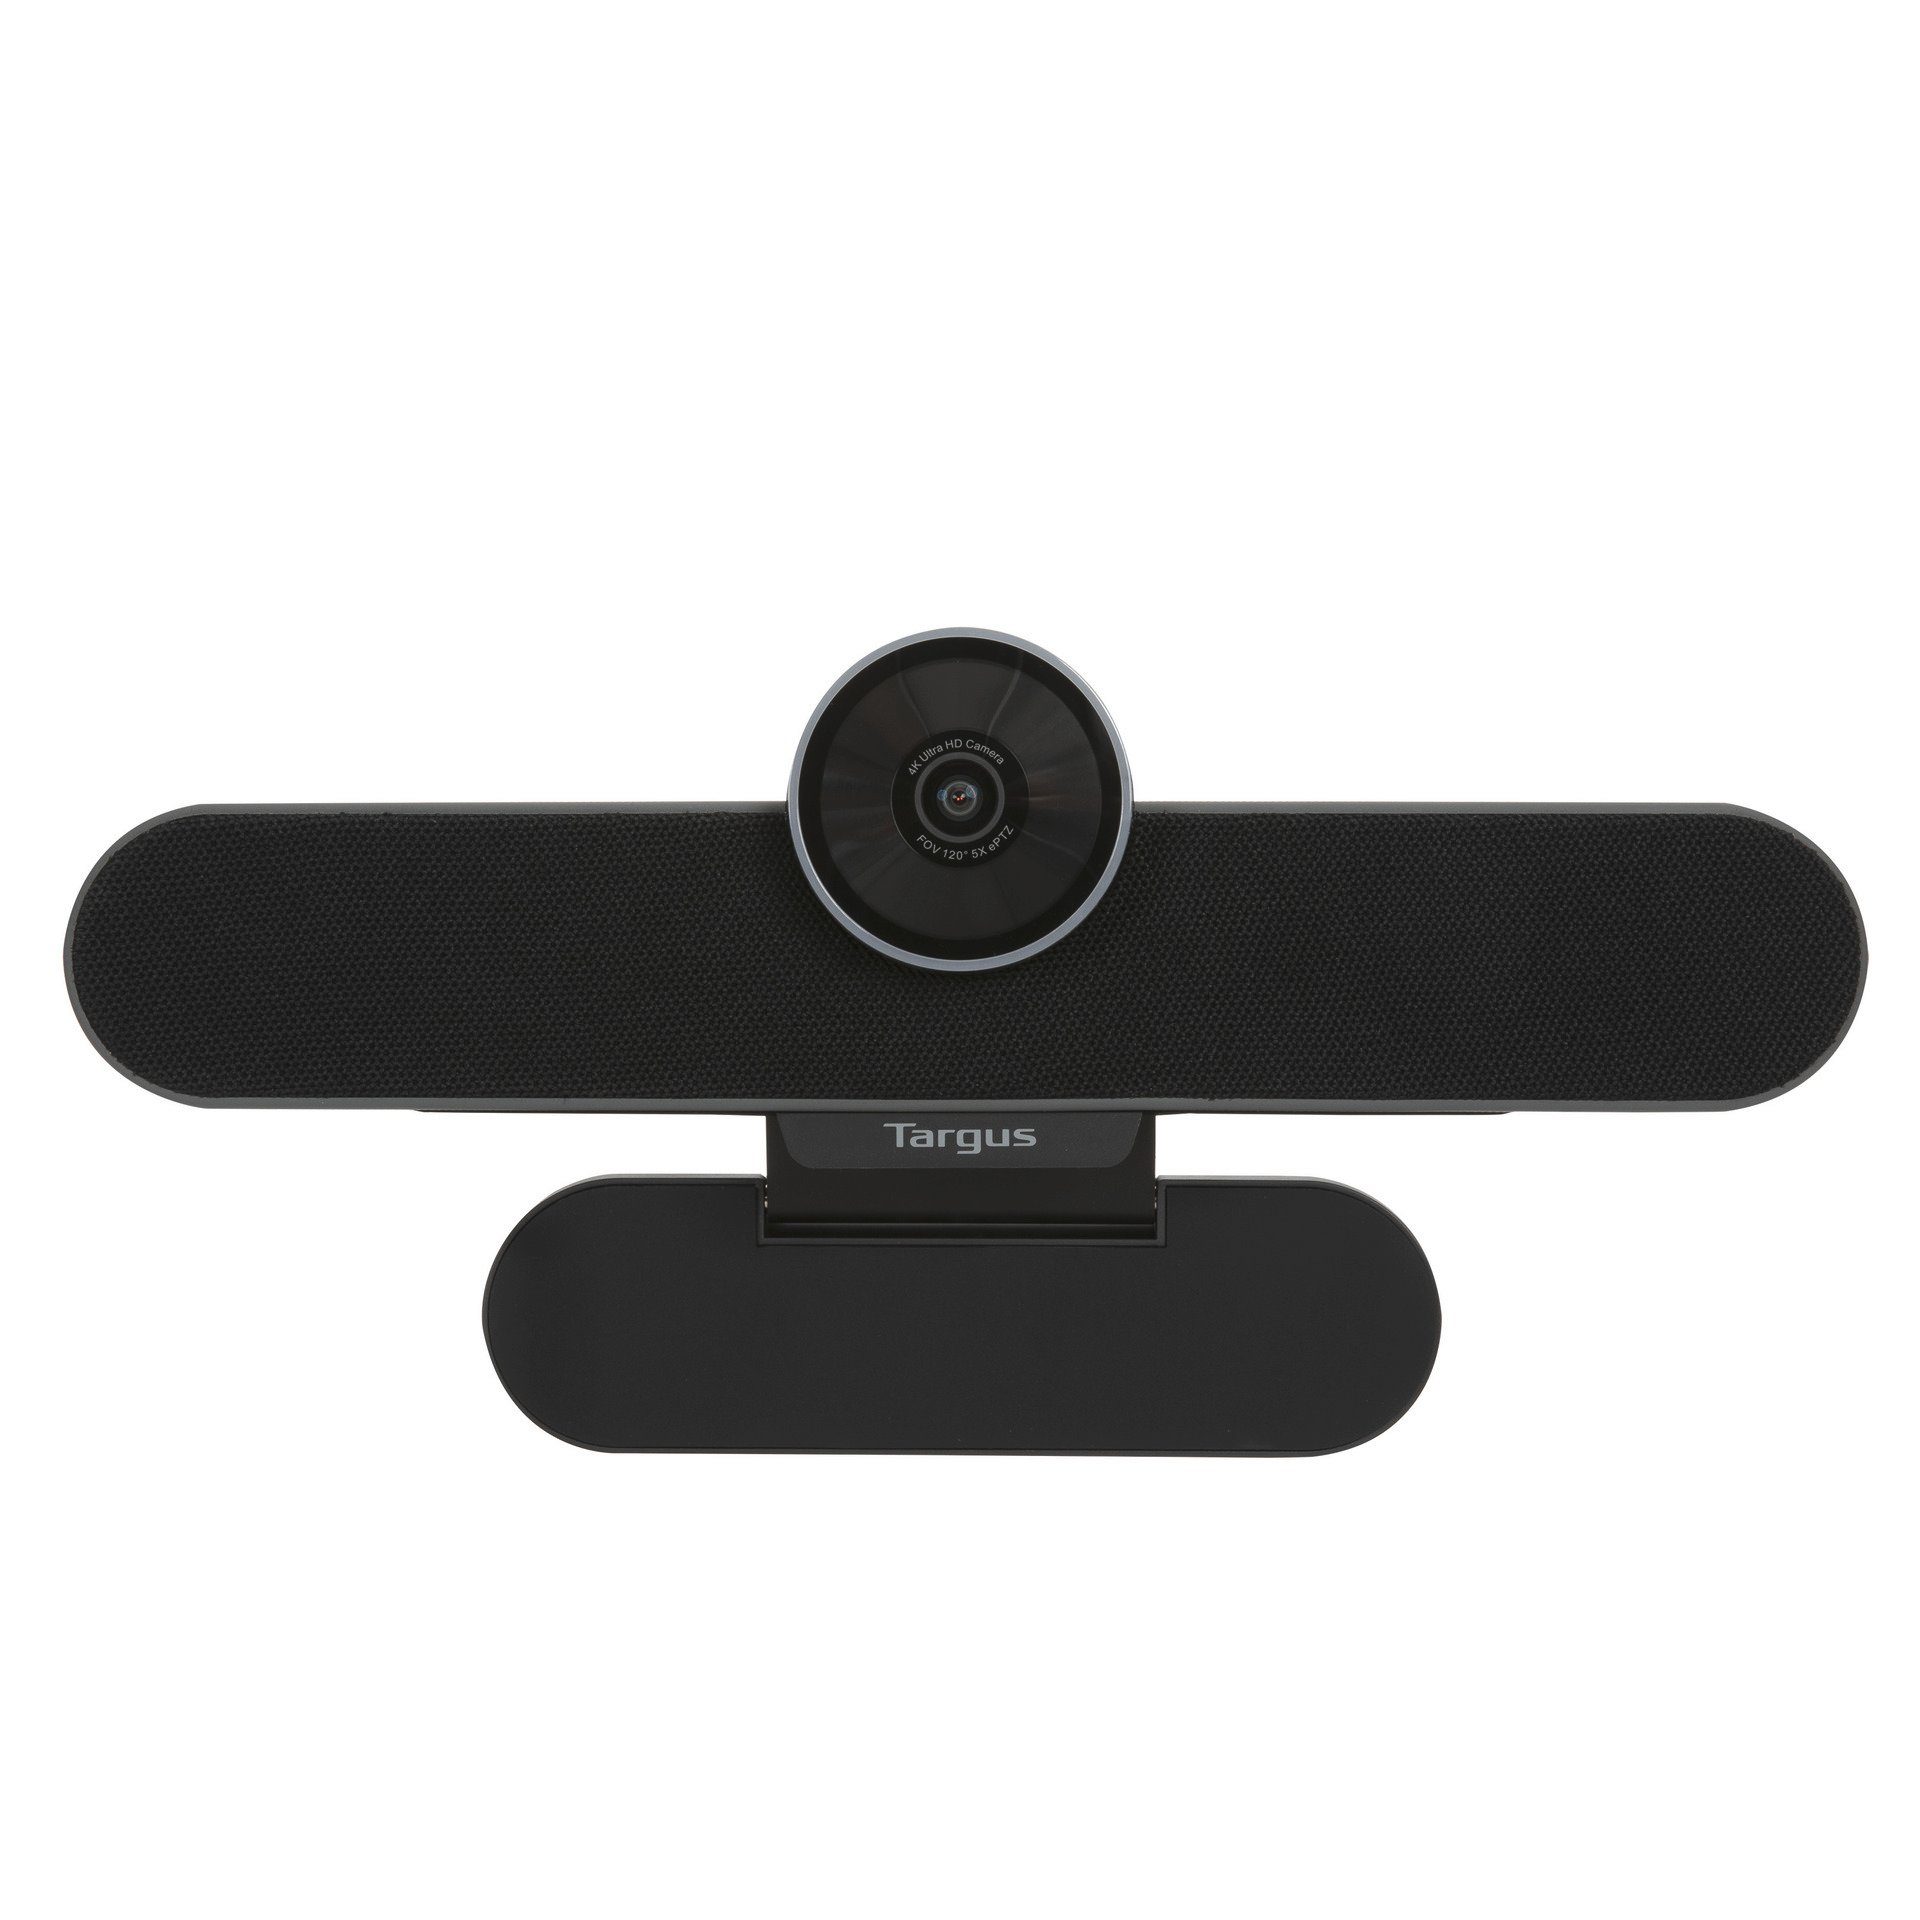 Targus All-in-One 4K HD, Conference Webcam Netzteil) System EU (4K Mit Ultra